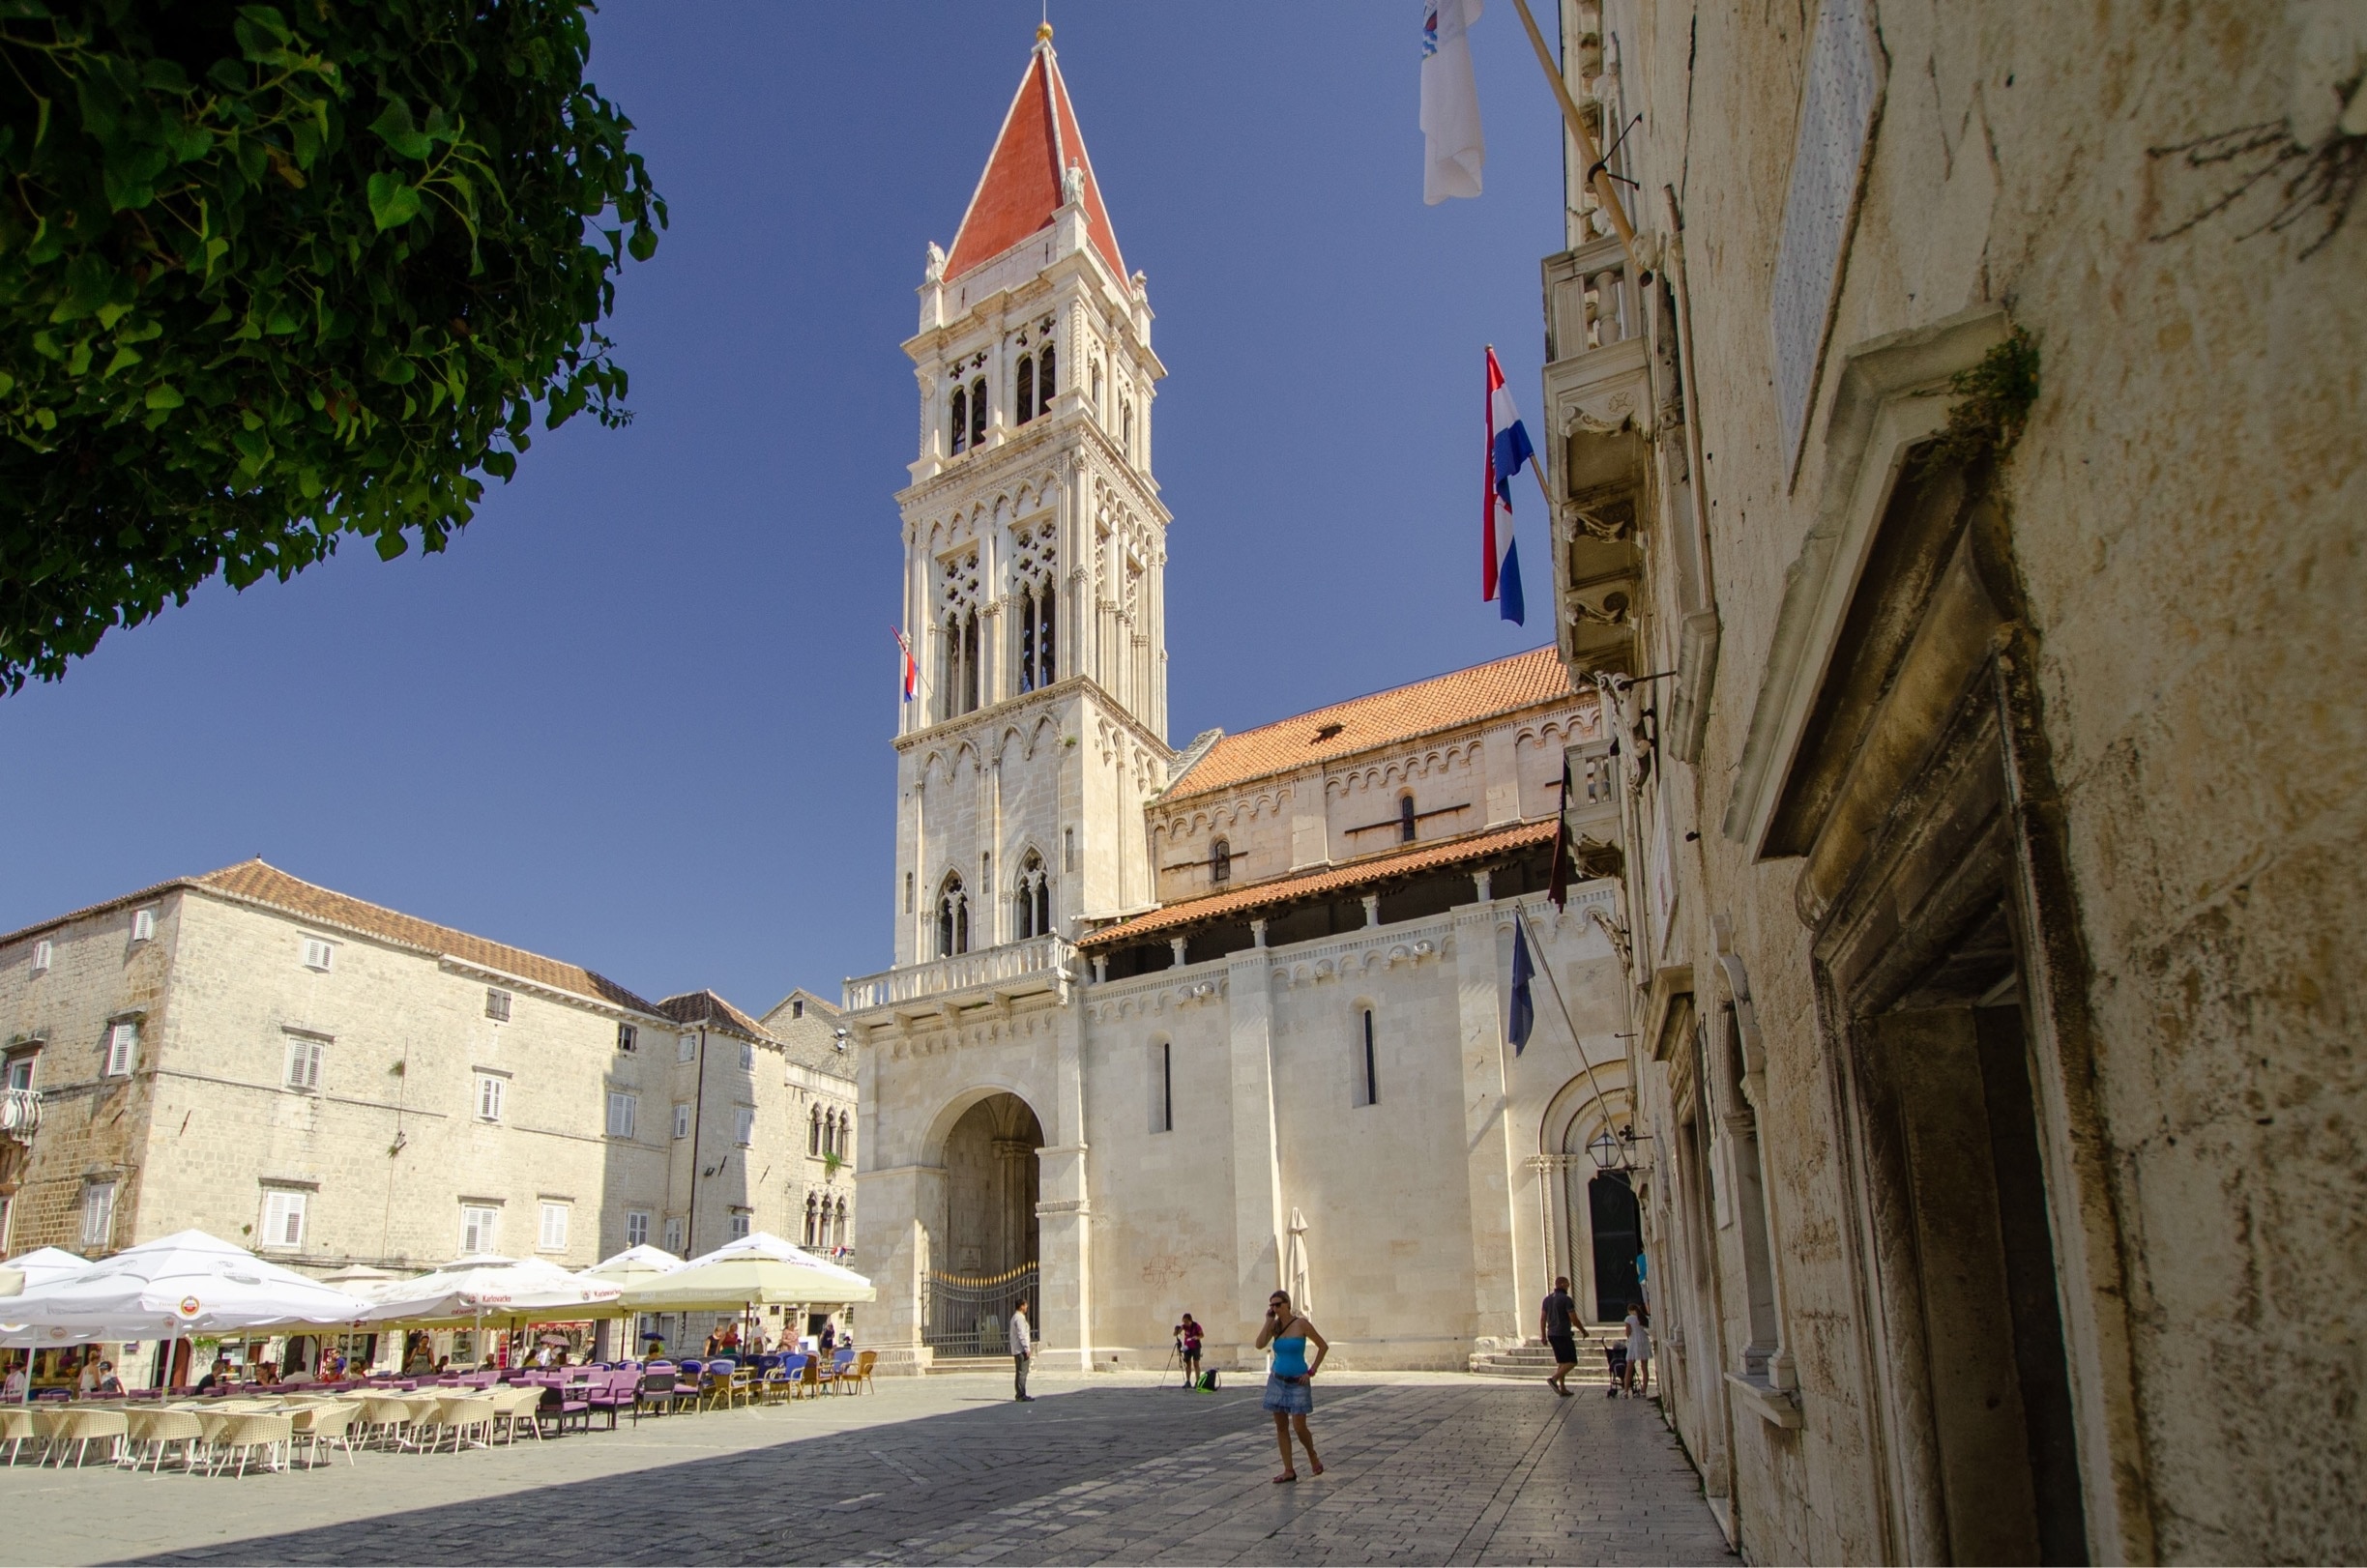 Cathedral of St. Lawrence, mostly completed in 1251; the bell tower construction began in the 14th century and completed in the 16th century.  It is located in the main town square by the Duke’s Palace, Loggia and Clock Tower.